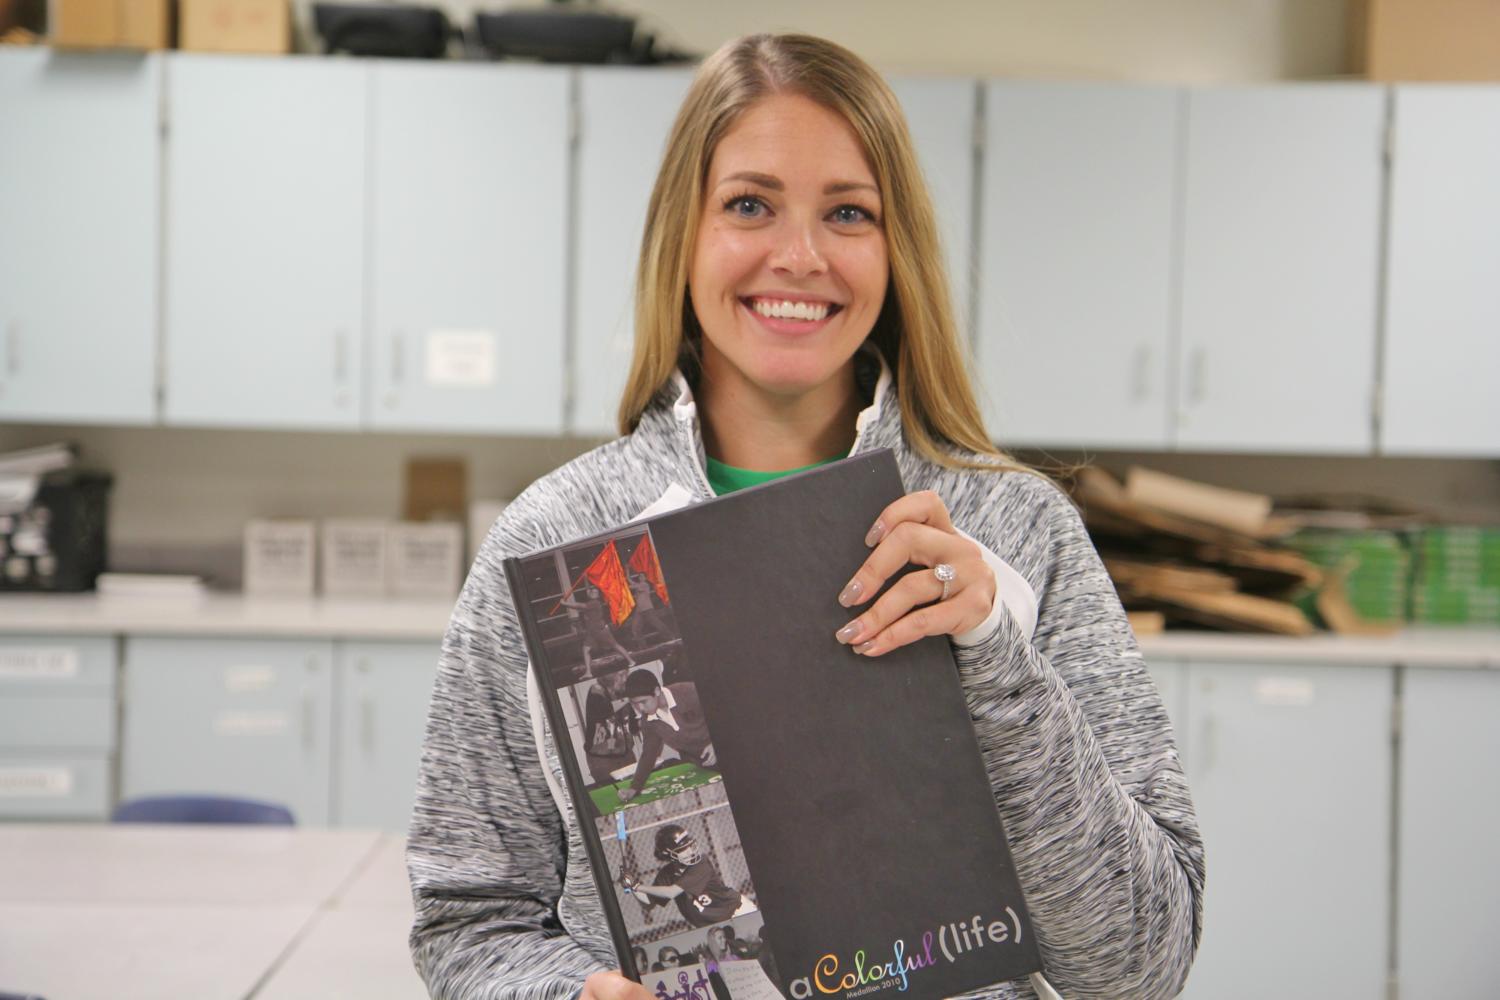 Kenzie McKeon, art teacher, poses with the 2010 MHS Yearbook. McKeon was voted Most Likely to Work at MHS.